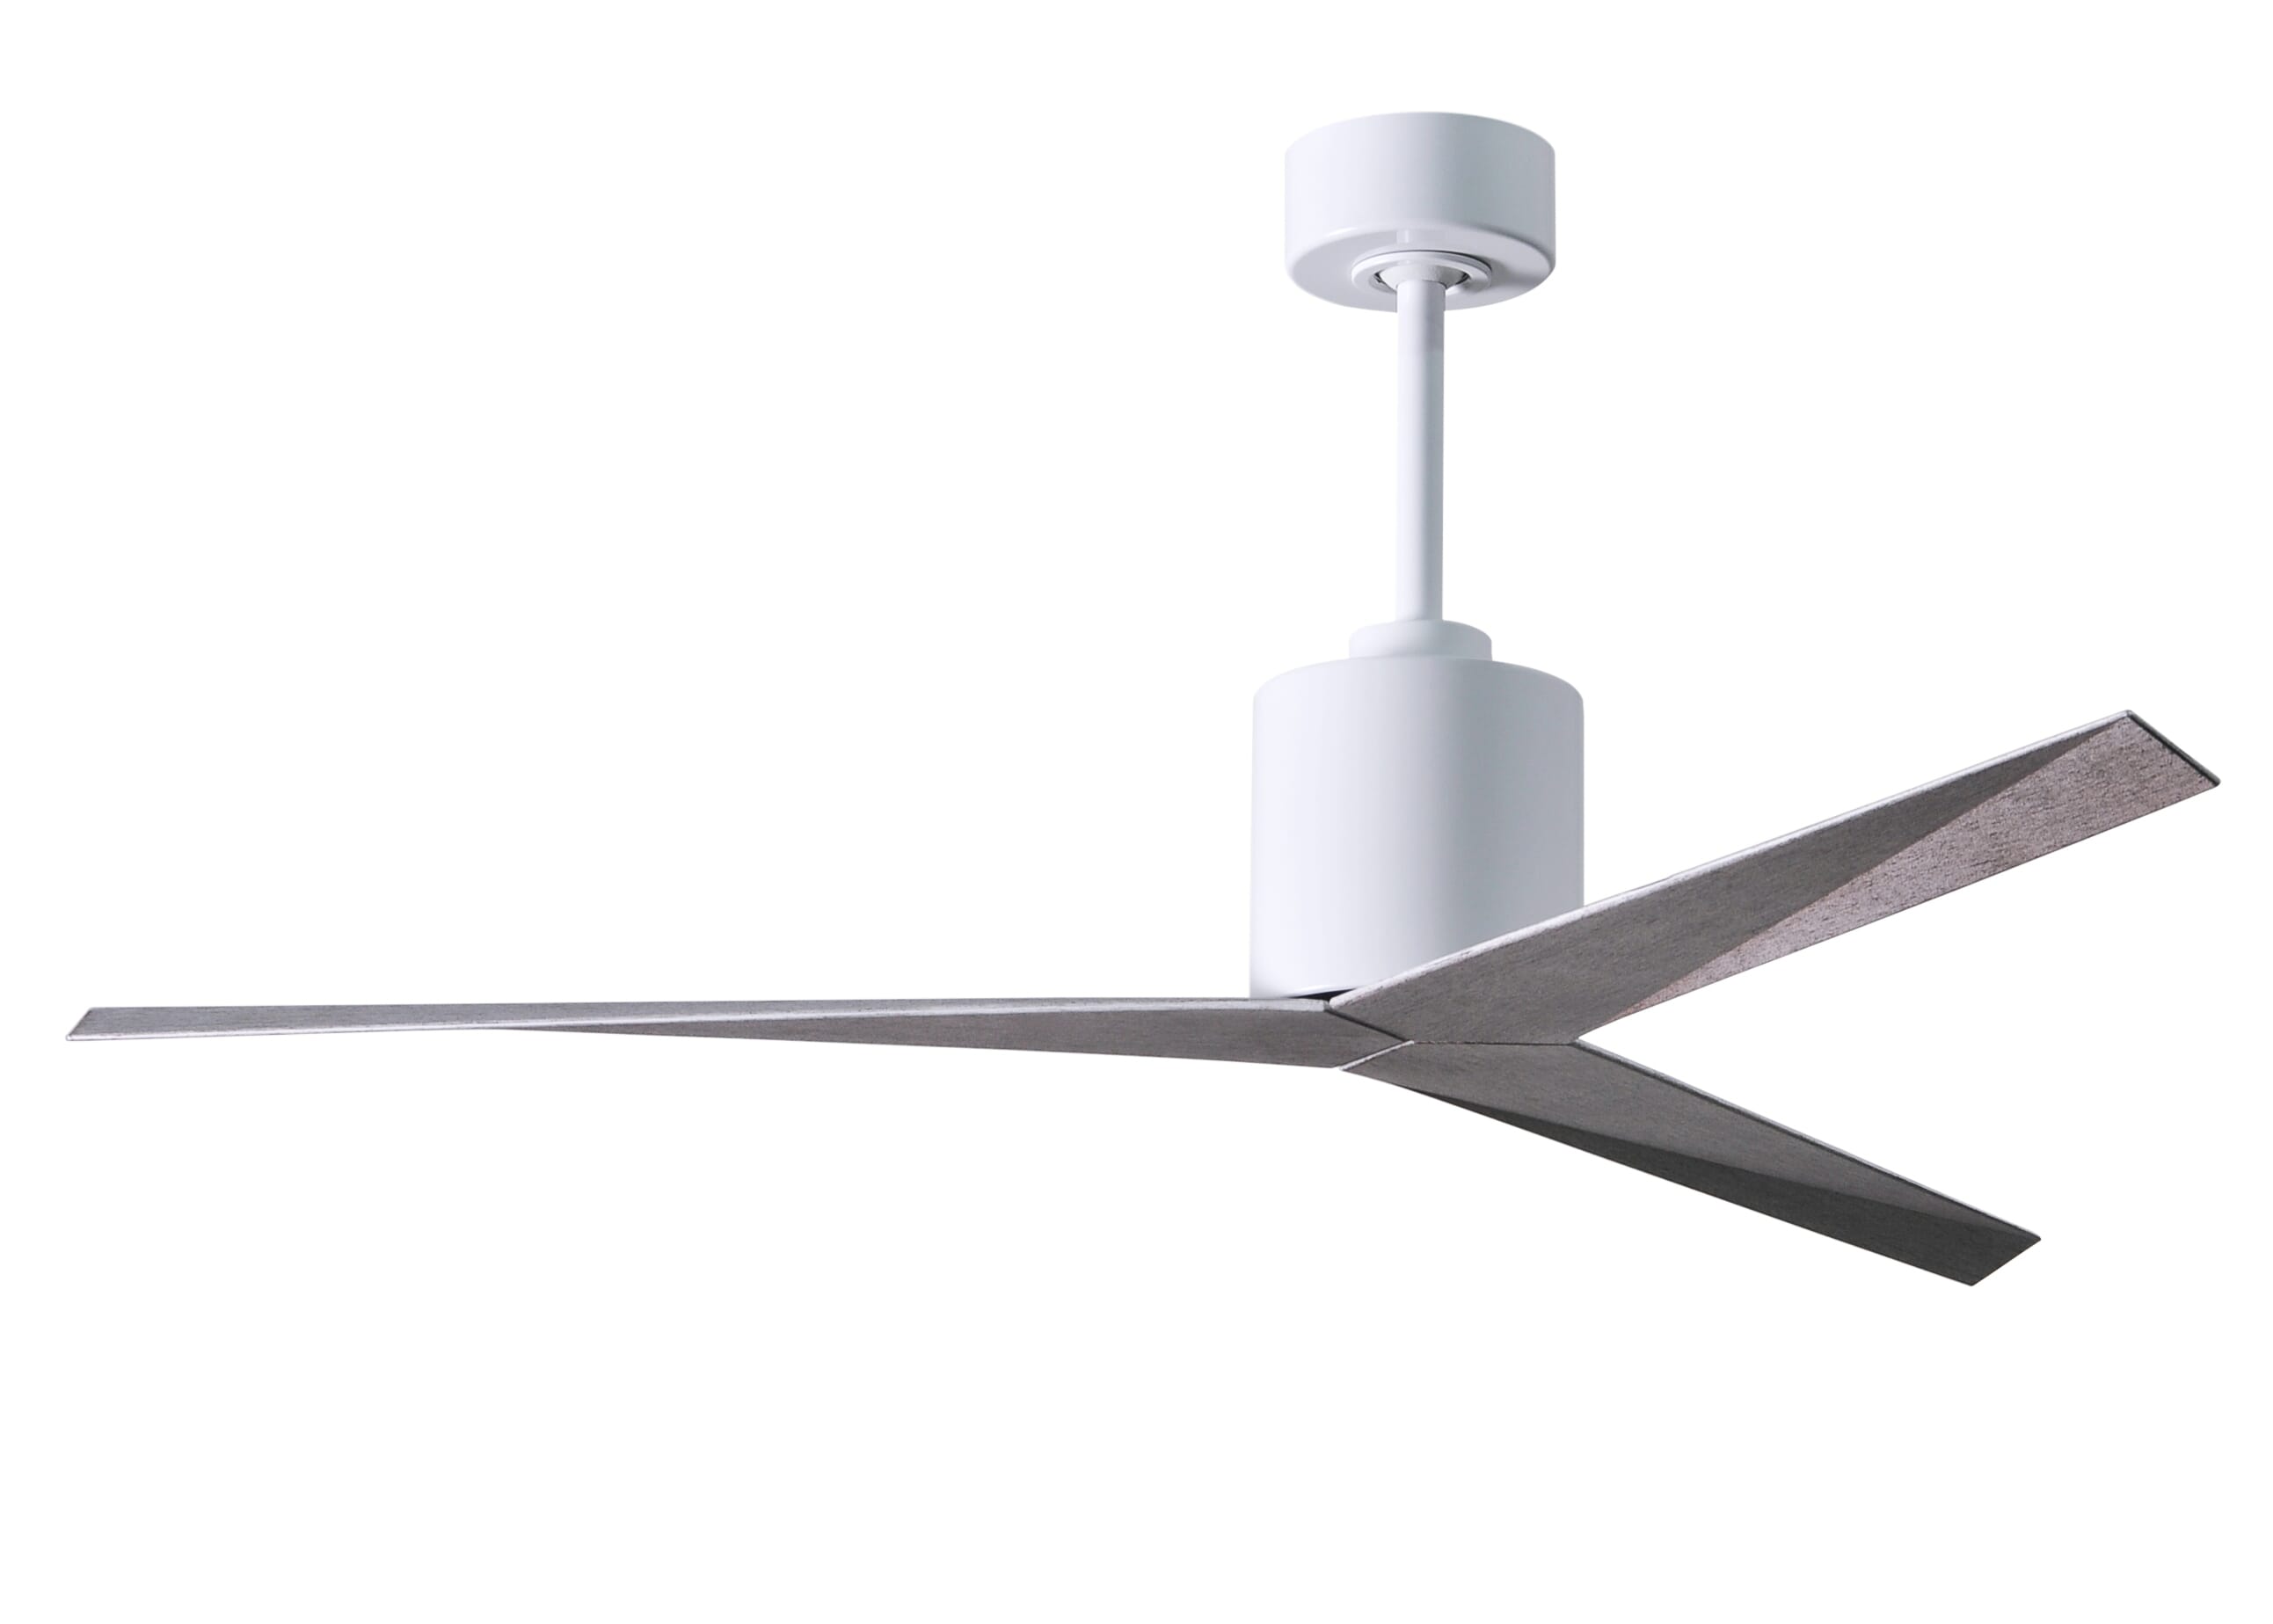 Eliza 6-Speed DC 56" Ceiling Fan in Gloss White with Barn Wood Tone blades